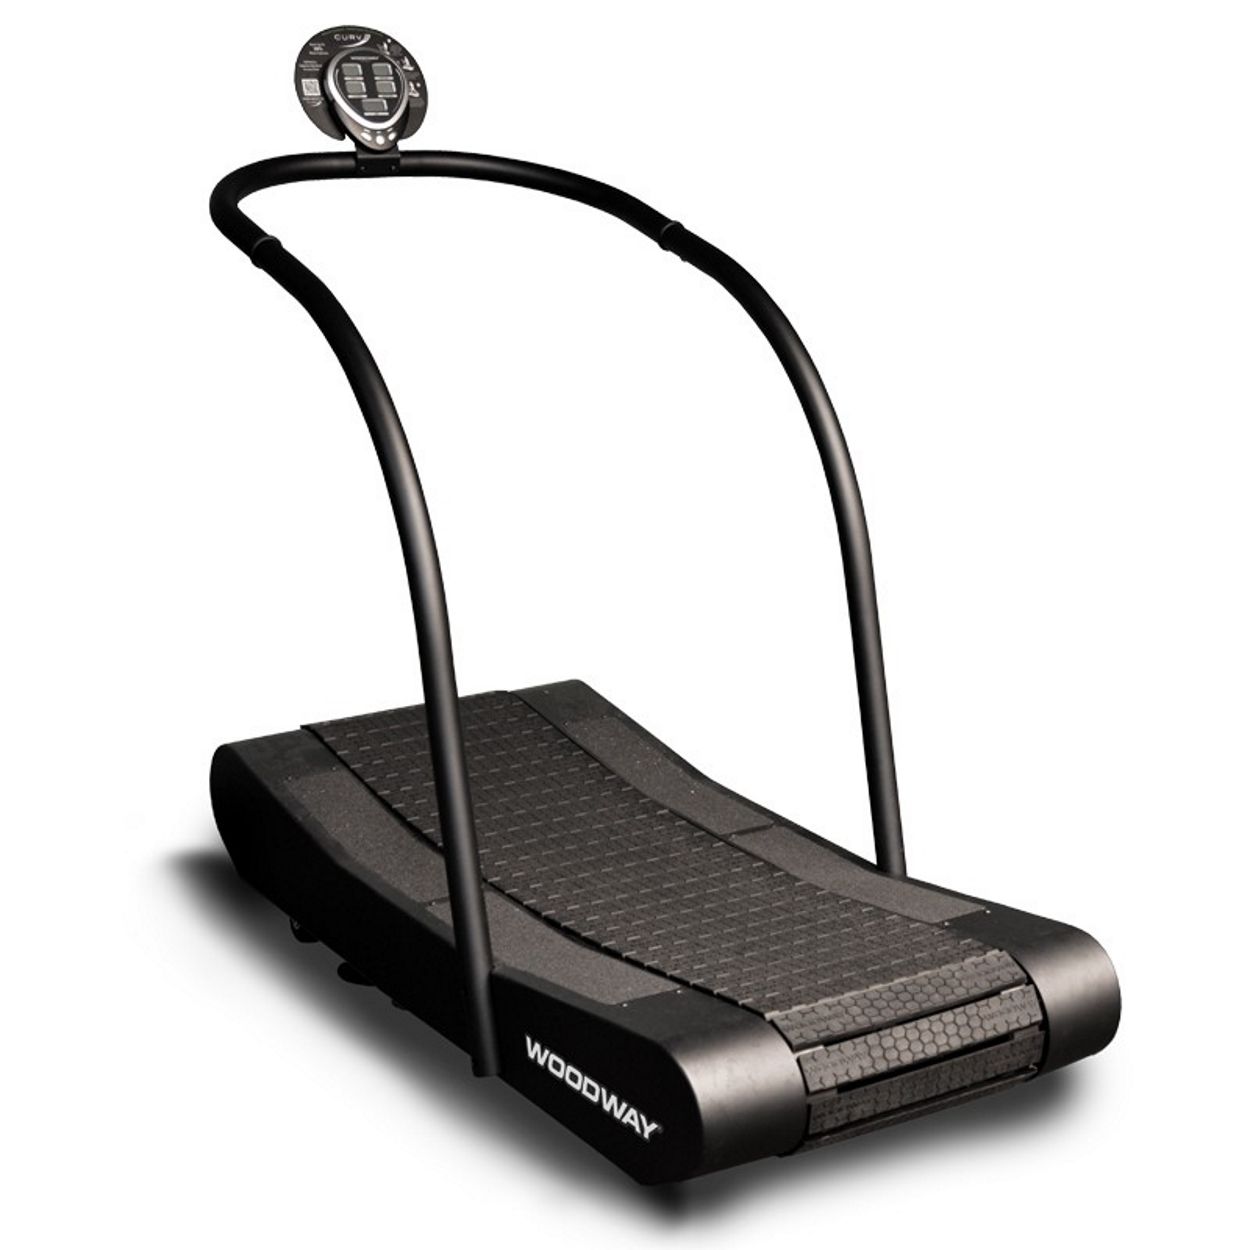 Woodway Curve Treadmill Gym Experts™